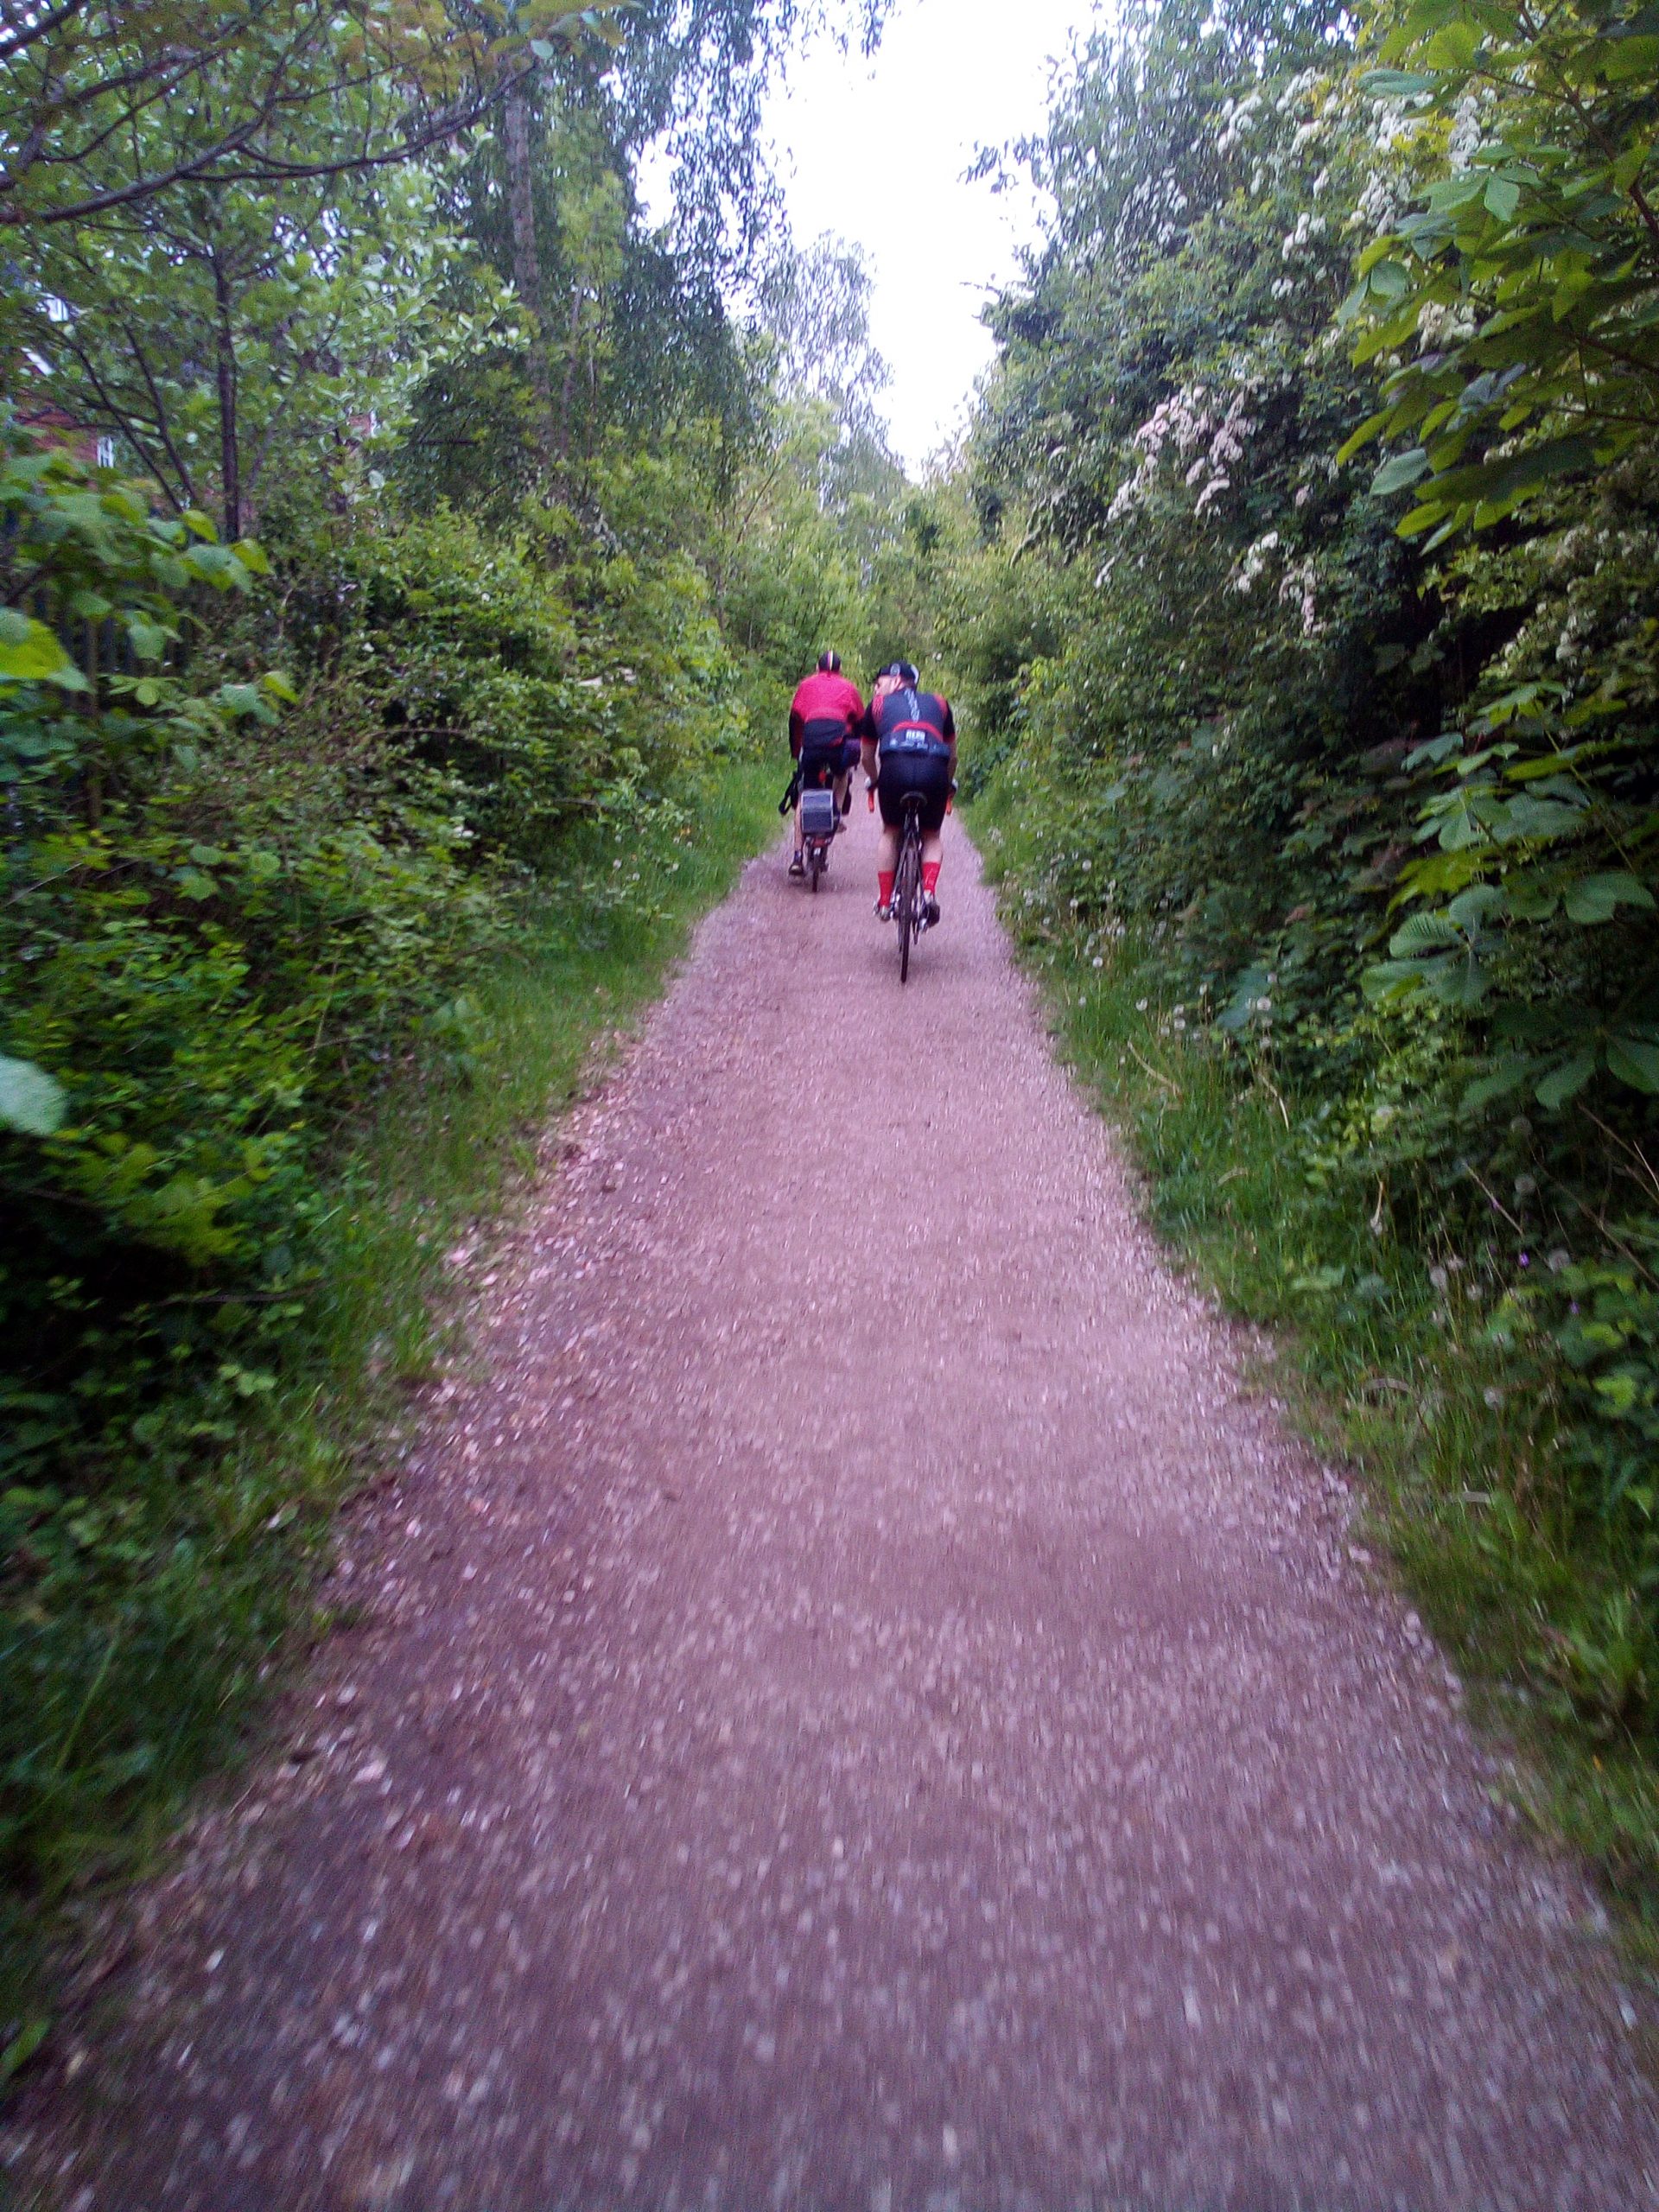 The Trans Pennine Trail